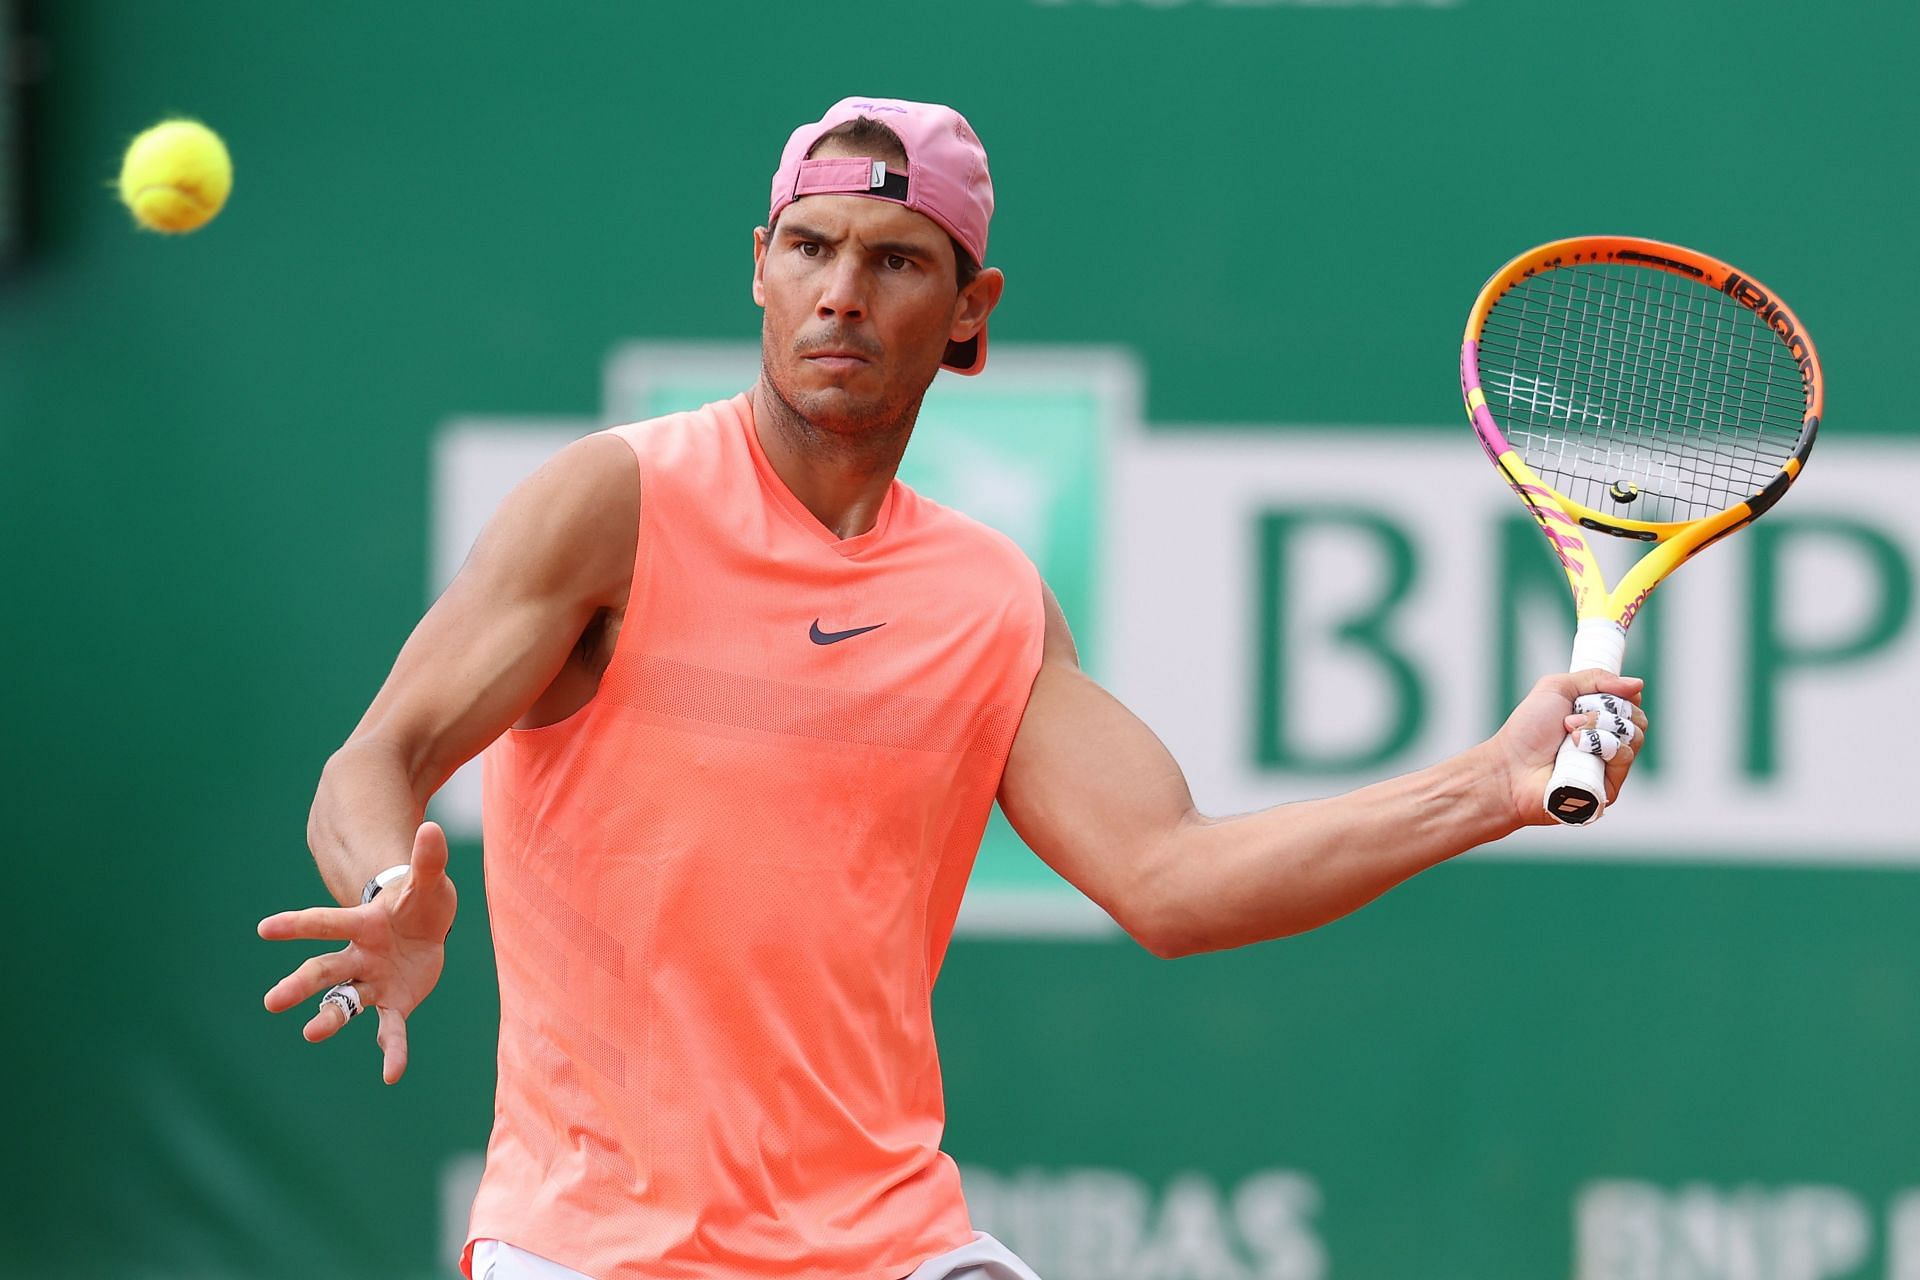 Rafael Nadal back in training after testing postiive for COVID-19 last week